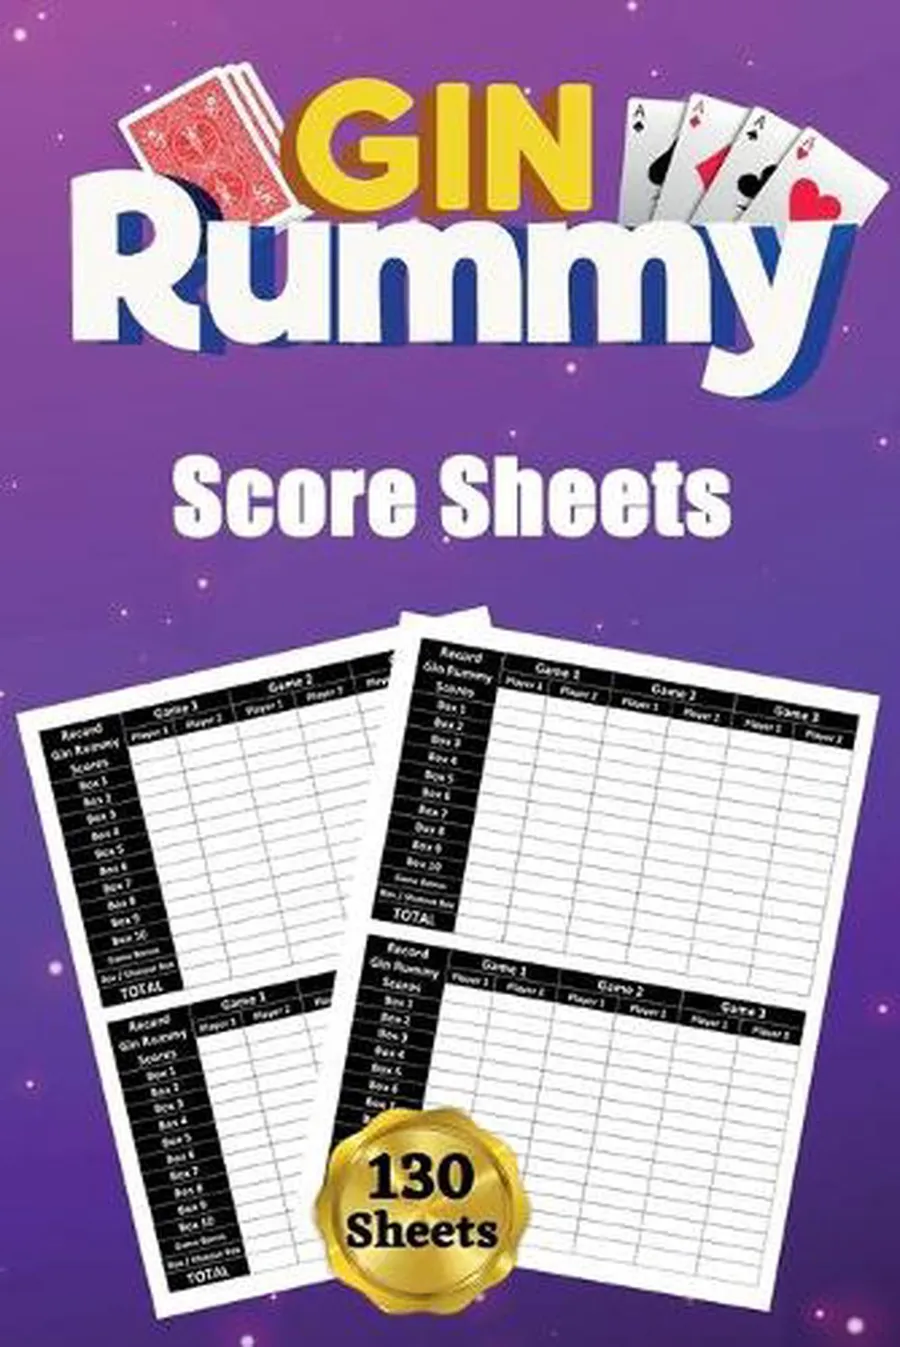 How about how to be good at rummy?